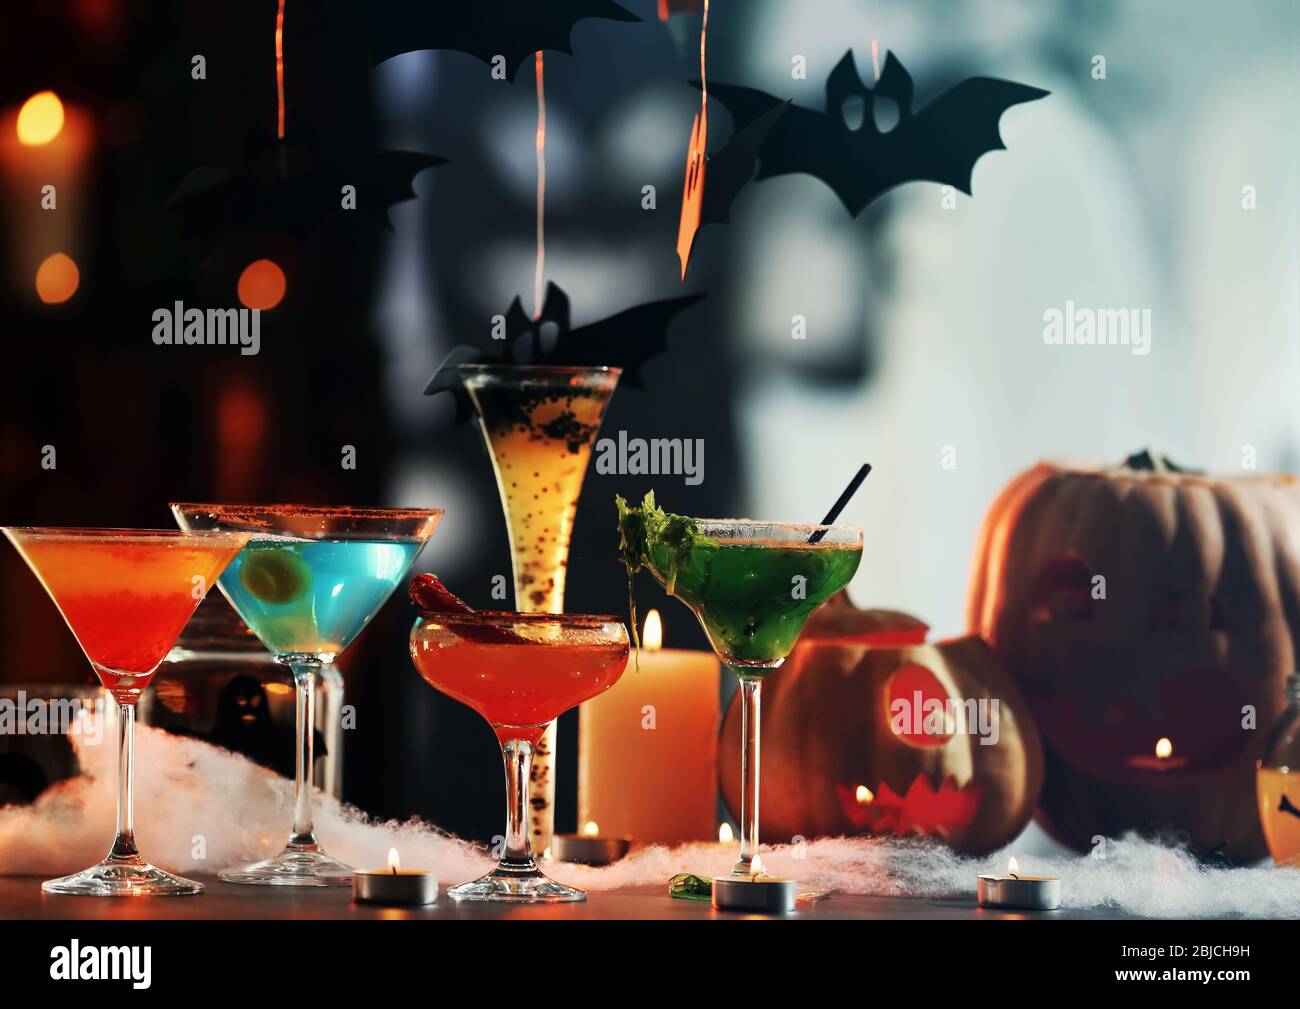 Colorful cocktails and decor for Halloween party, on blurred background  Stock Photo - Alamy